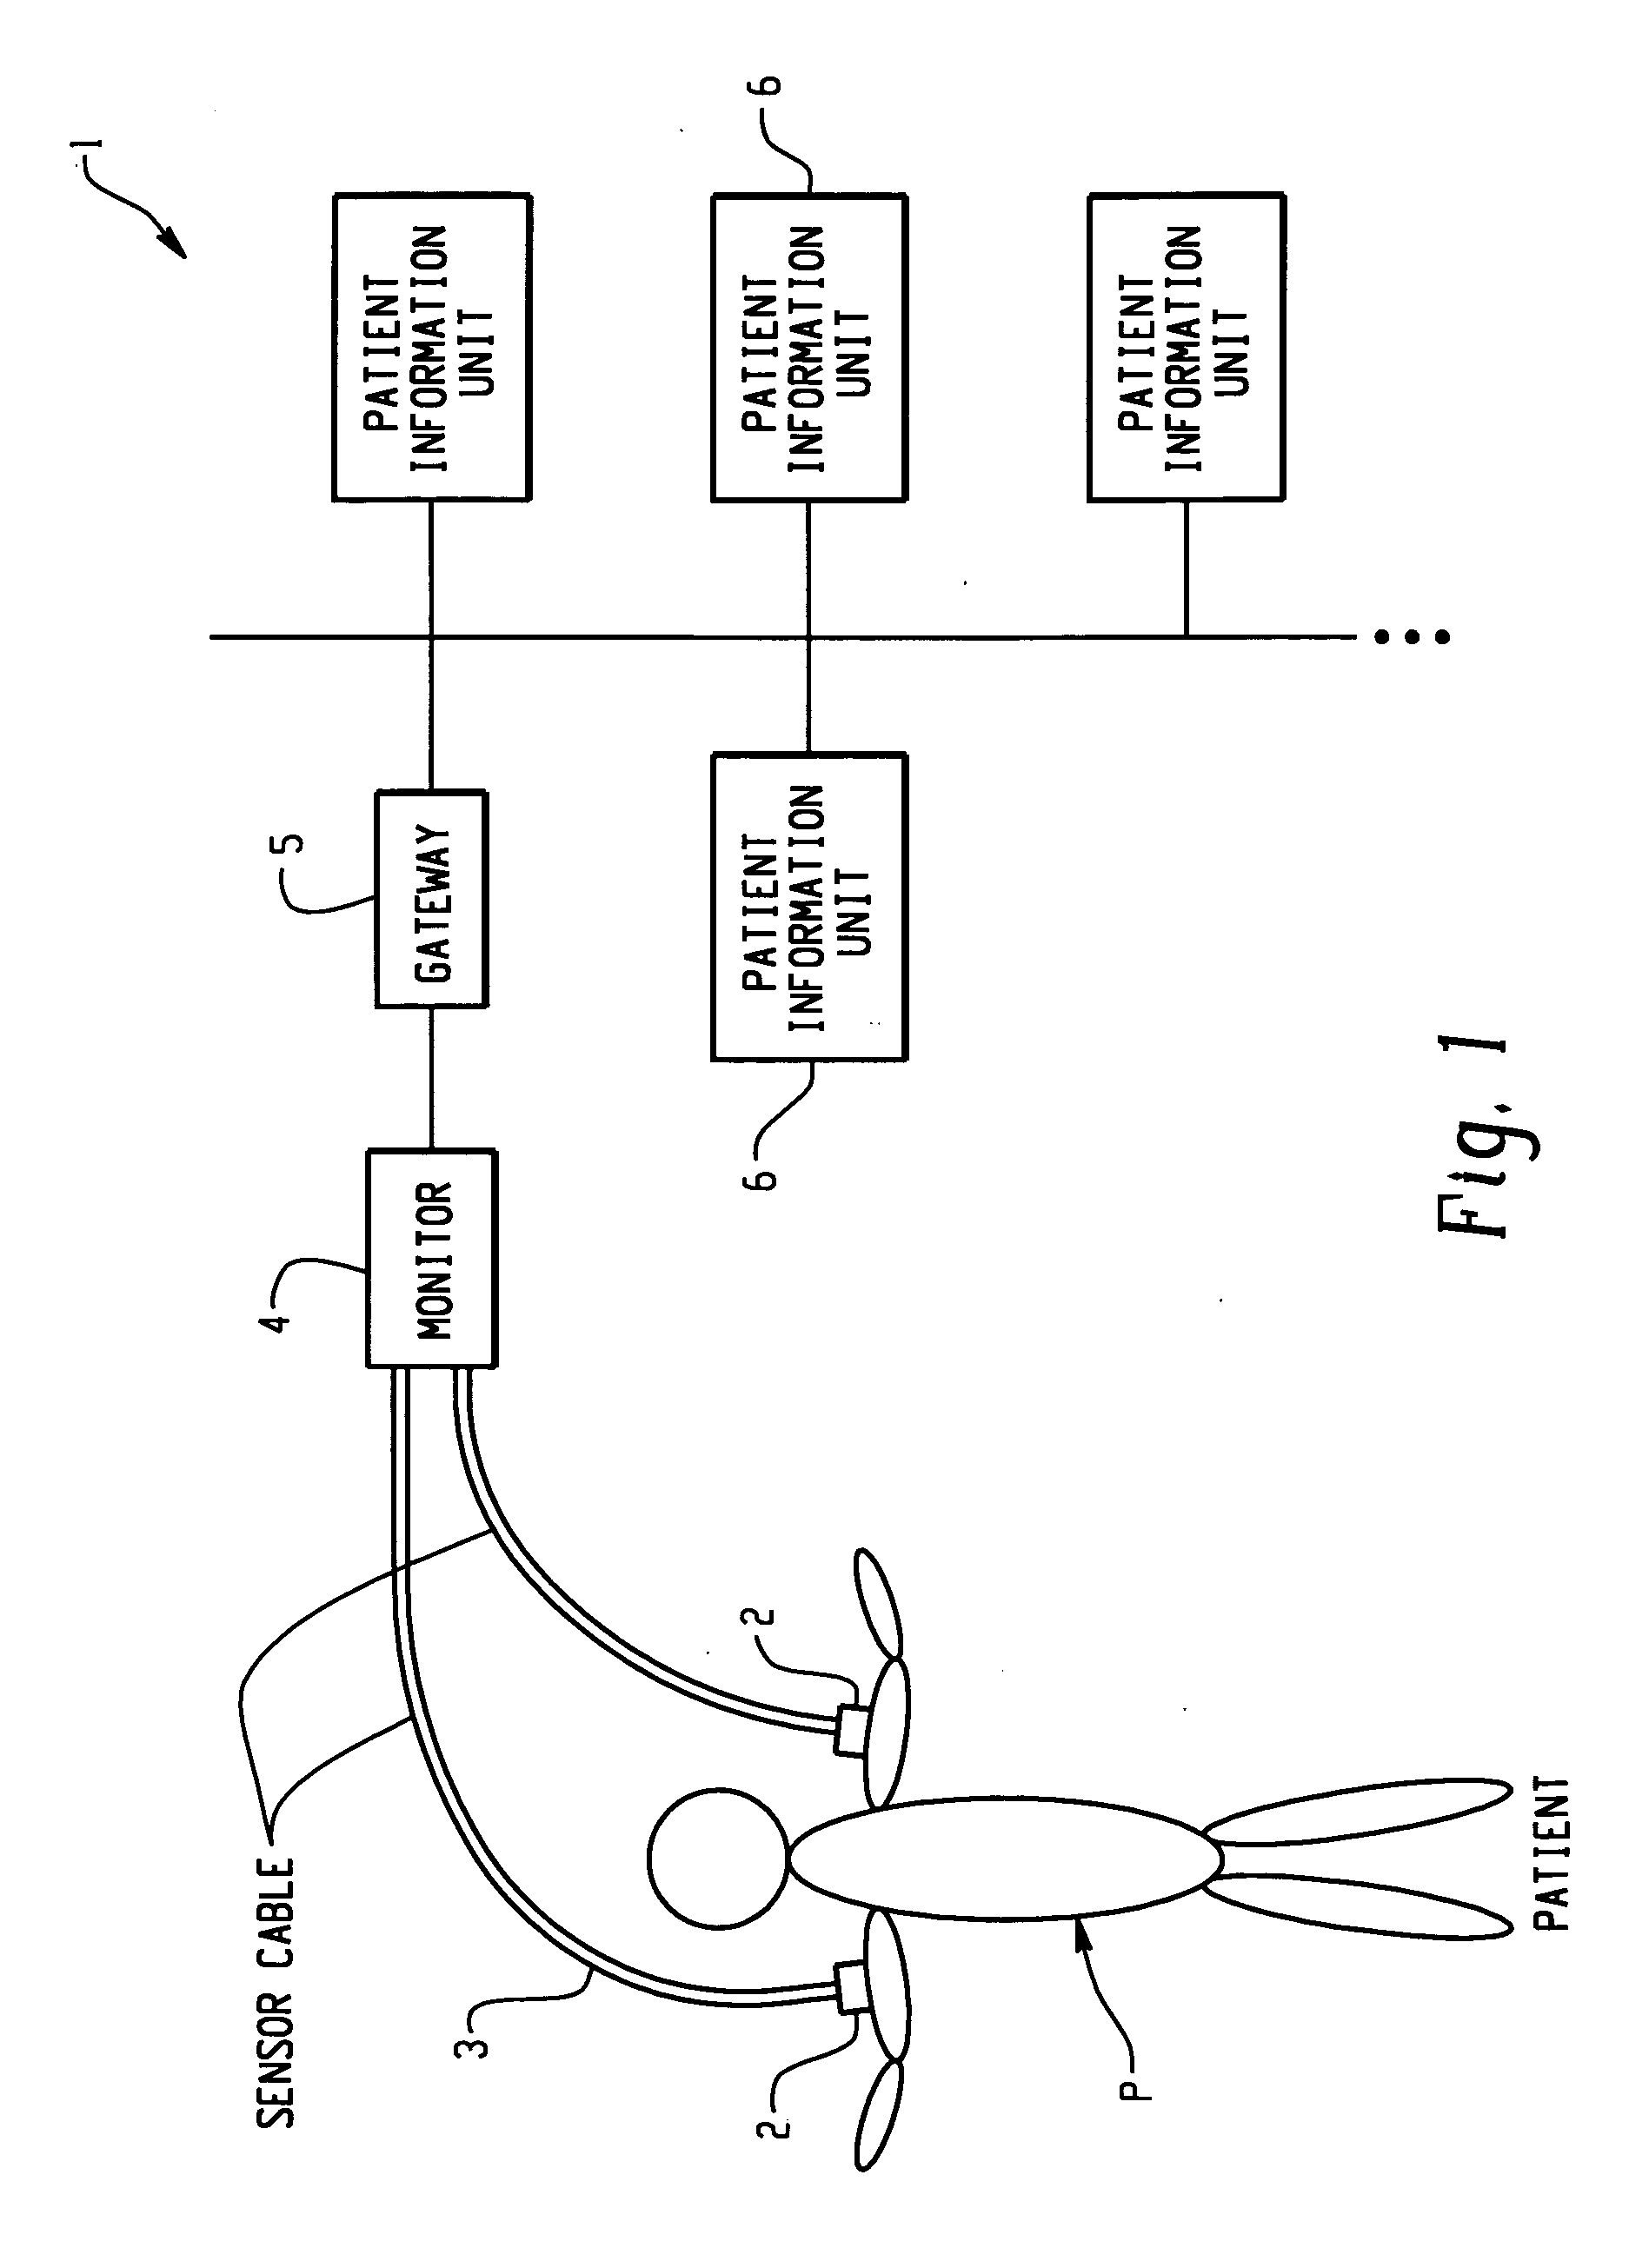 Patient information management apparatus and method